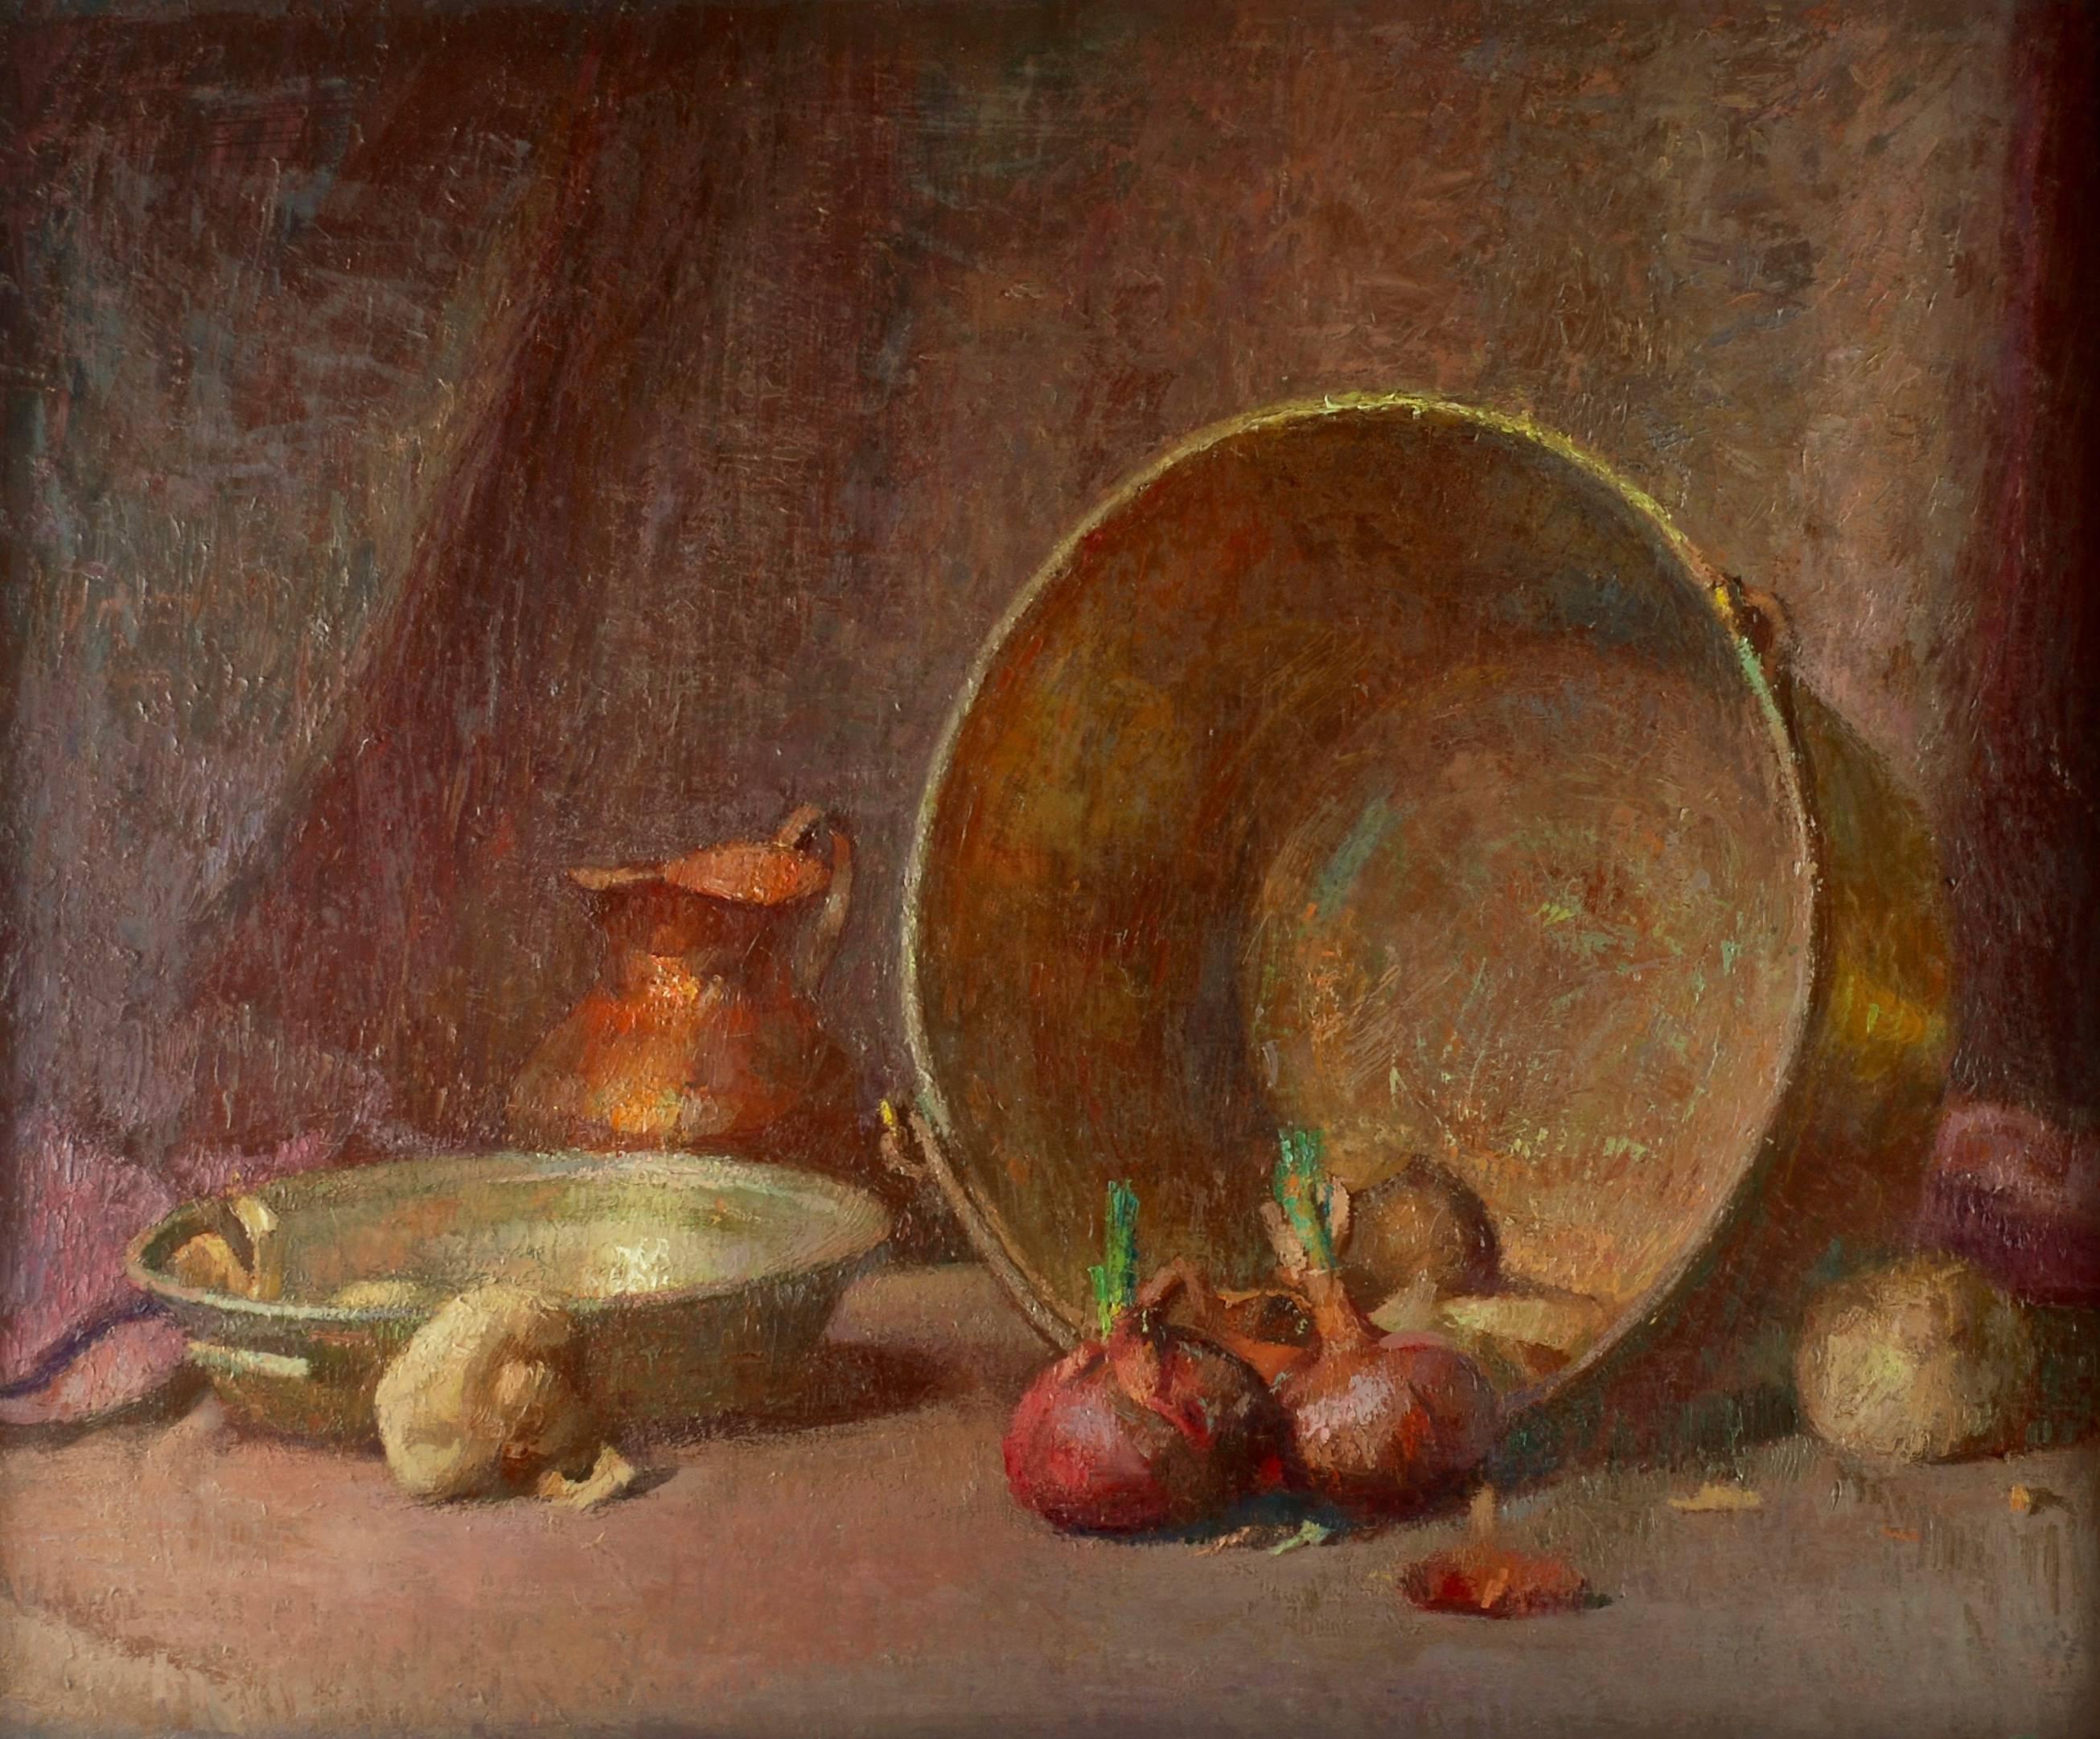 This striking still life was executed by well listed artist Henry Hensche (1899 - 1992). A gifted painter widely recognized as an unparalleled colorist, Hensche began his studies at the Art Institute of Chicago and moved to the famed Cape Cod School